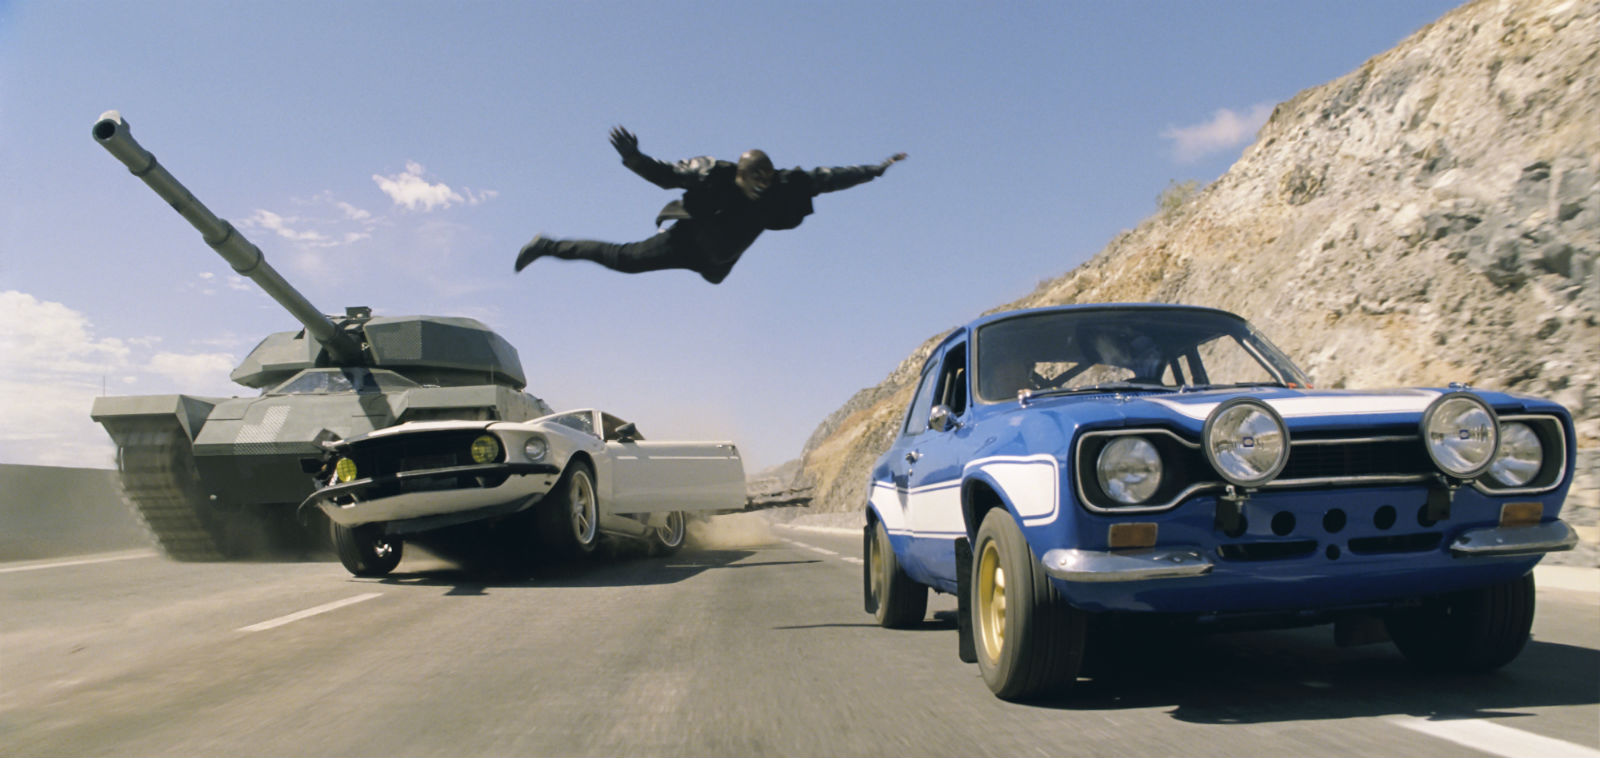 Furious 7 Action Scenes